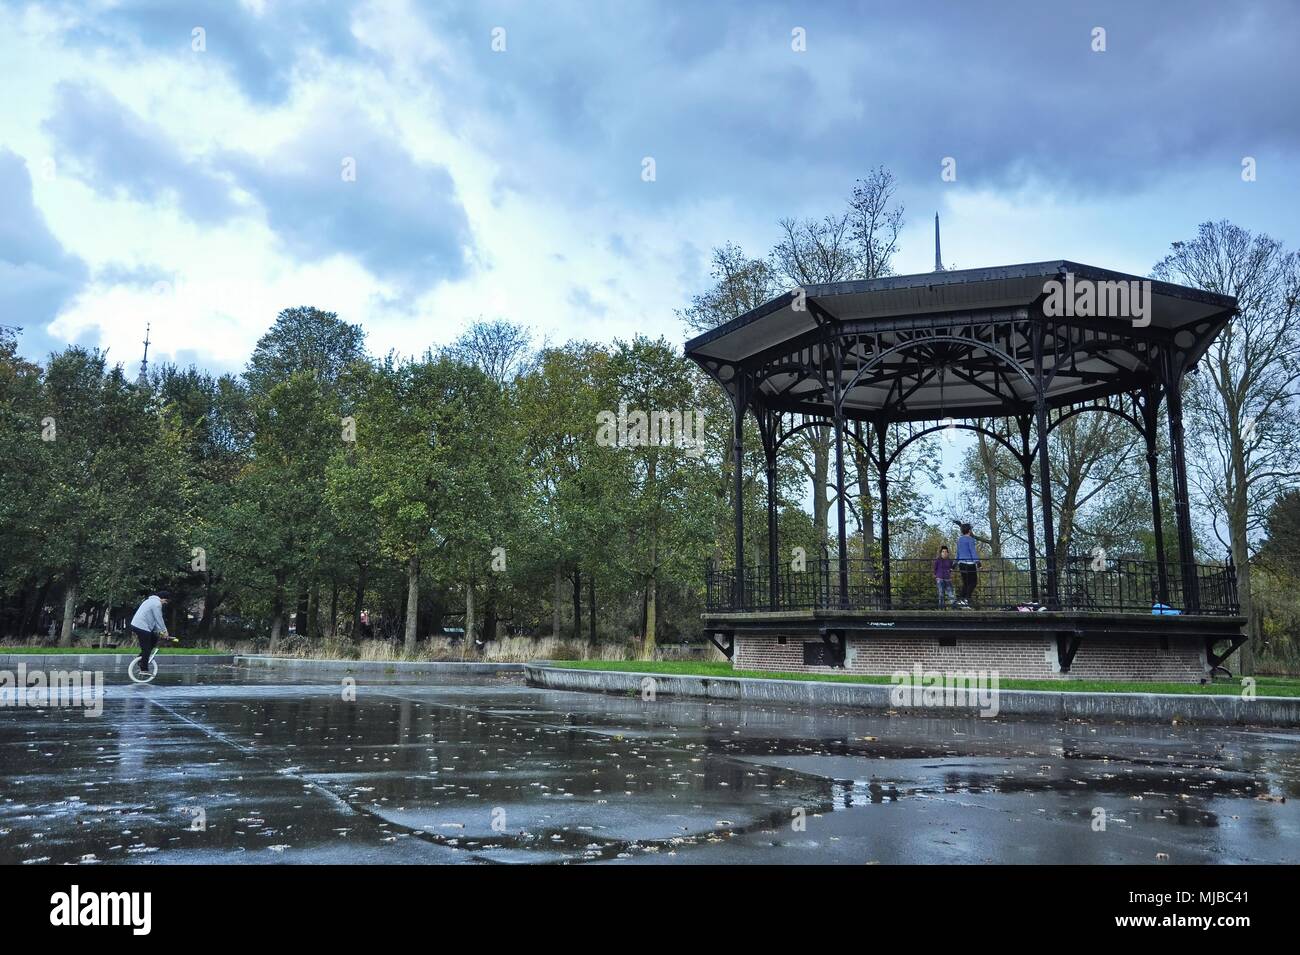 Amsterdam, Netherlands: The outdoor pavilion in the Oosterpark with locals young man practicing the mono-cycle the band stand Stock Photo - Alamy